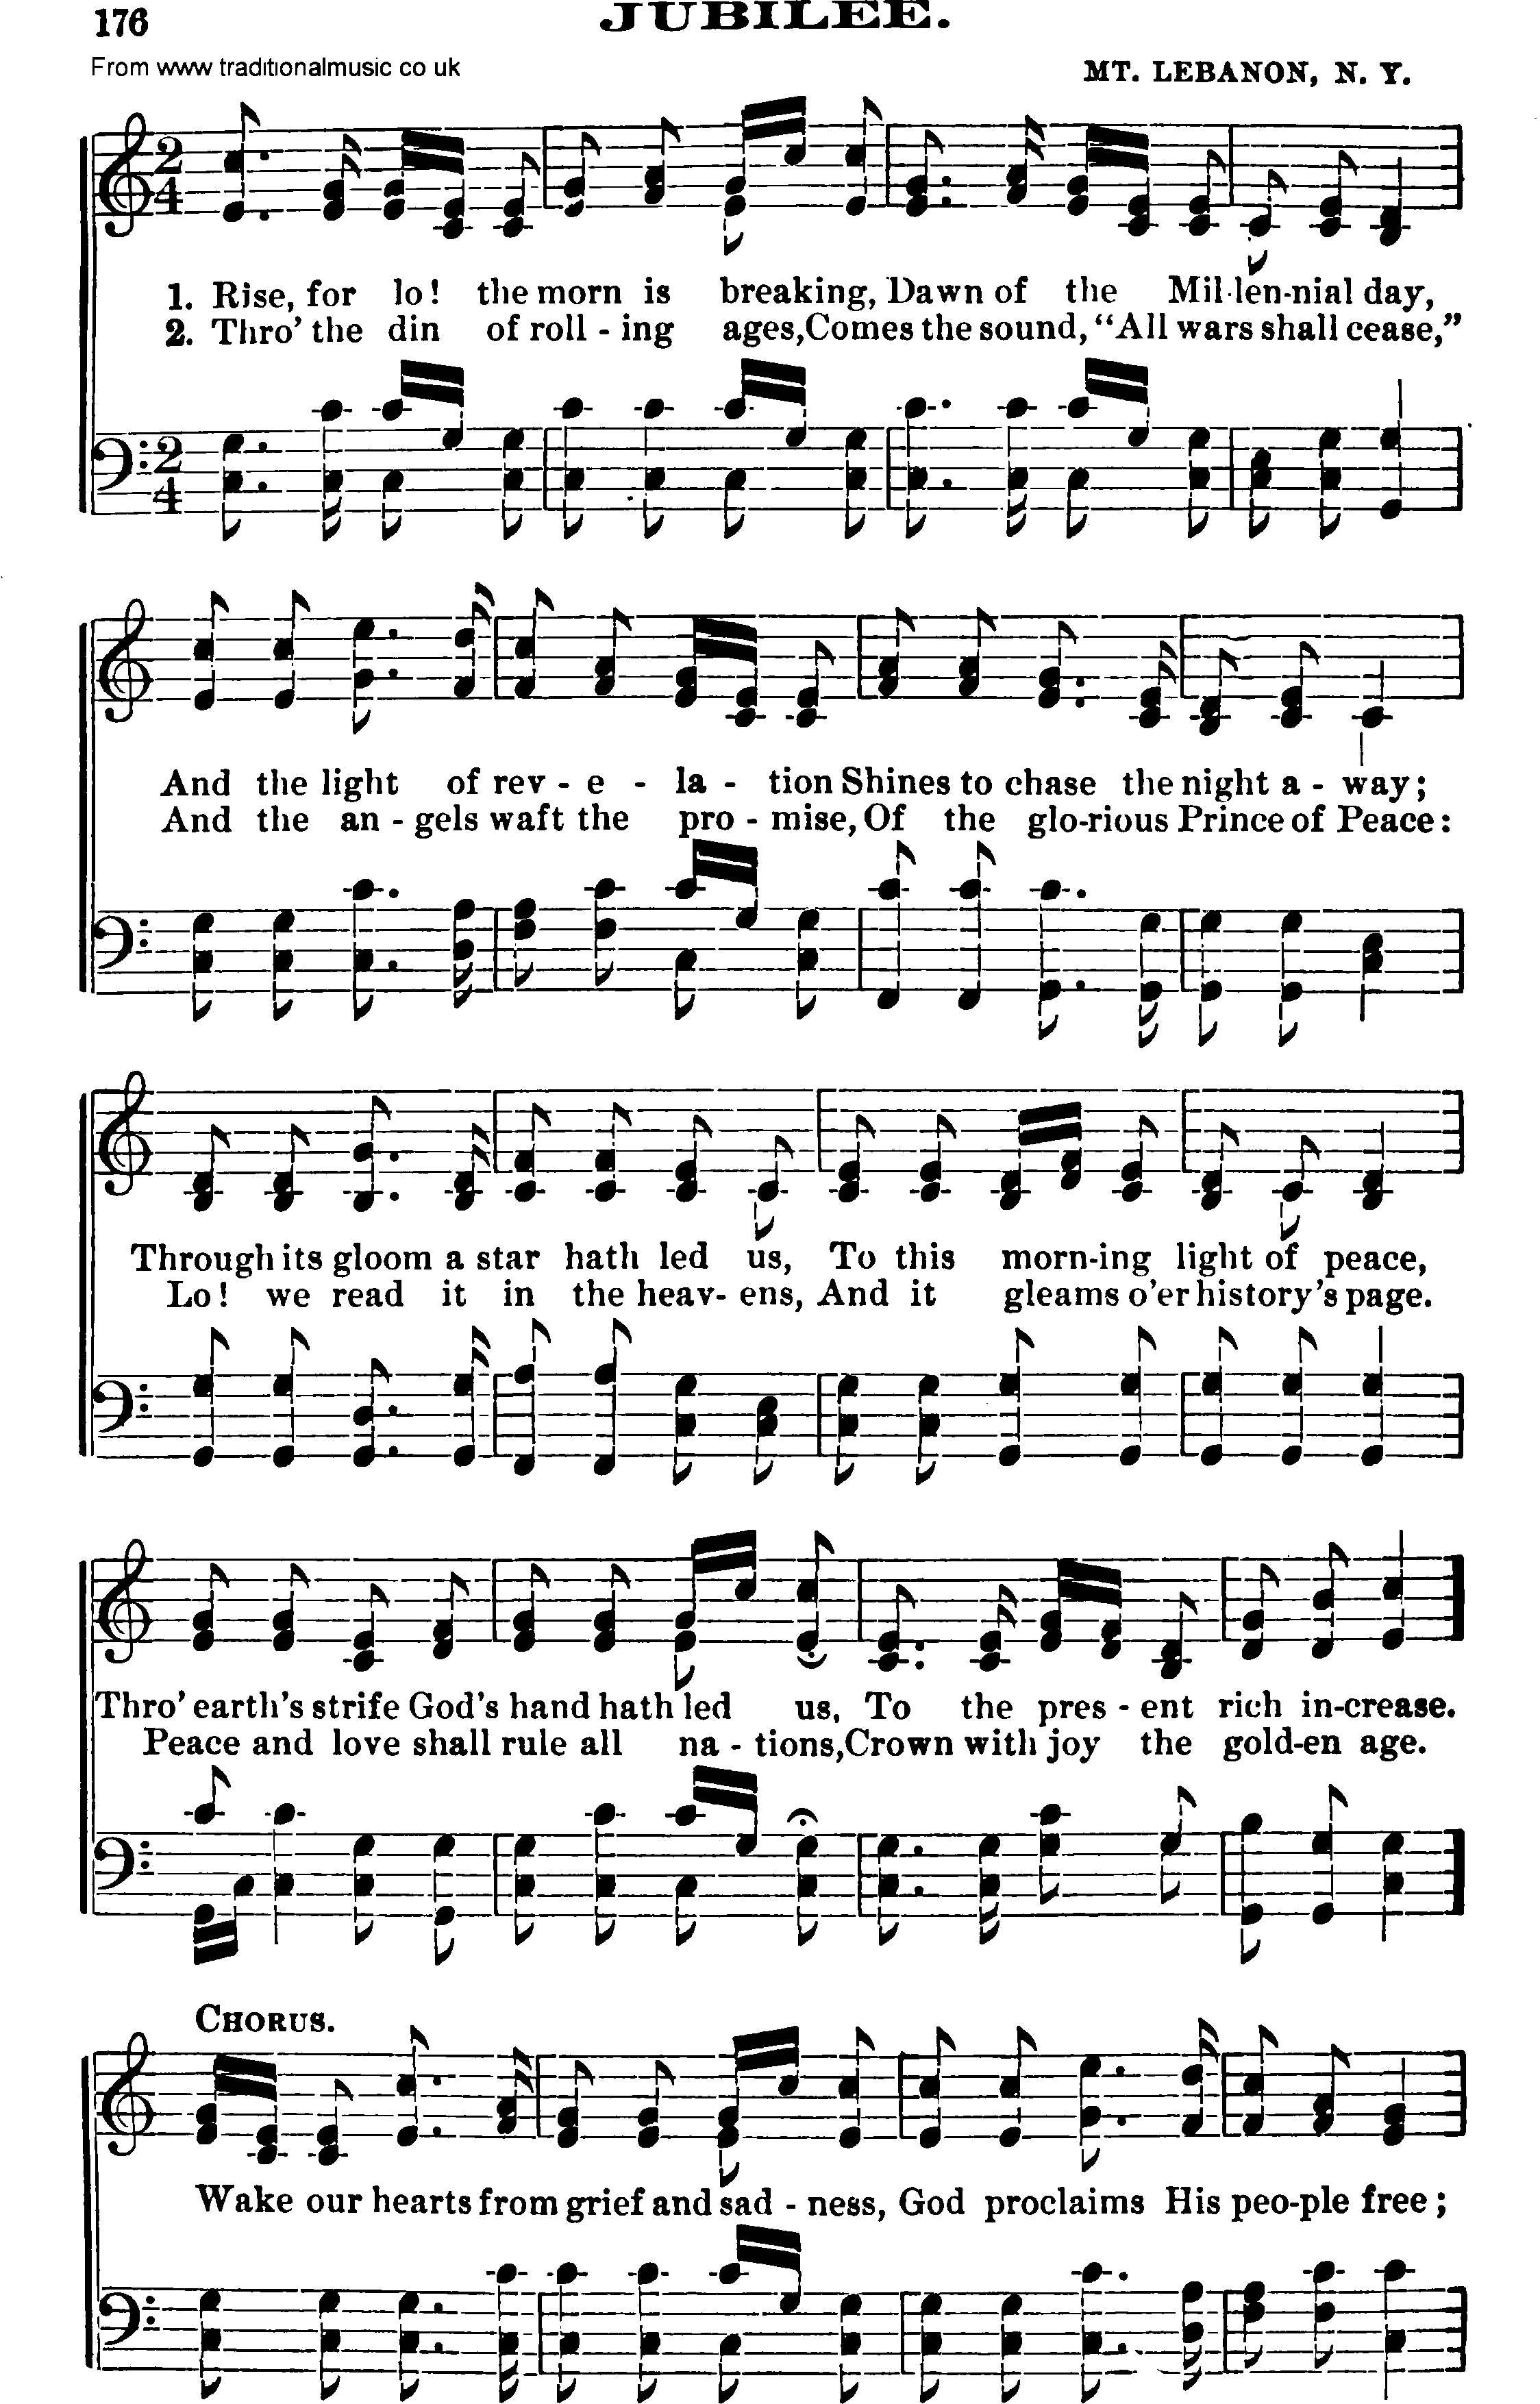 Shaker Music collection, Hymn: Jubilee, sheetmusic and PDF